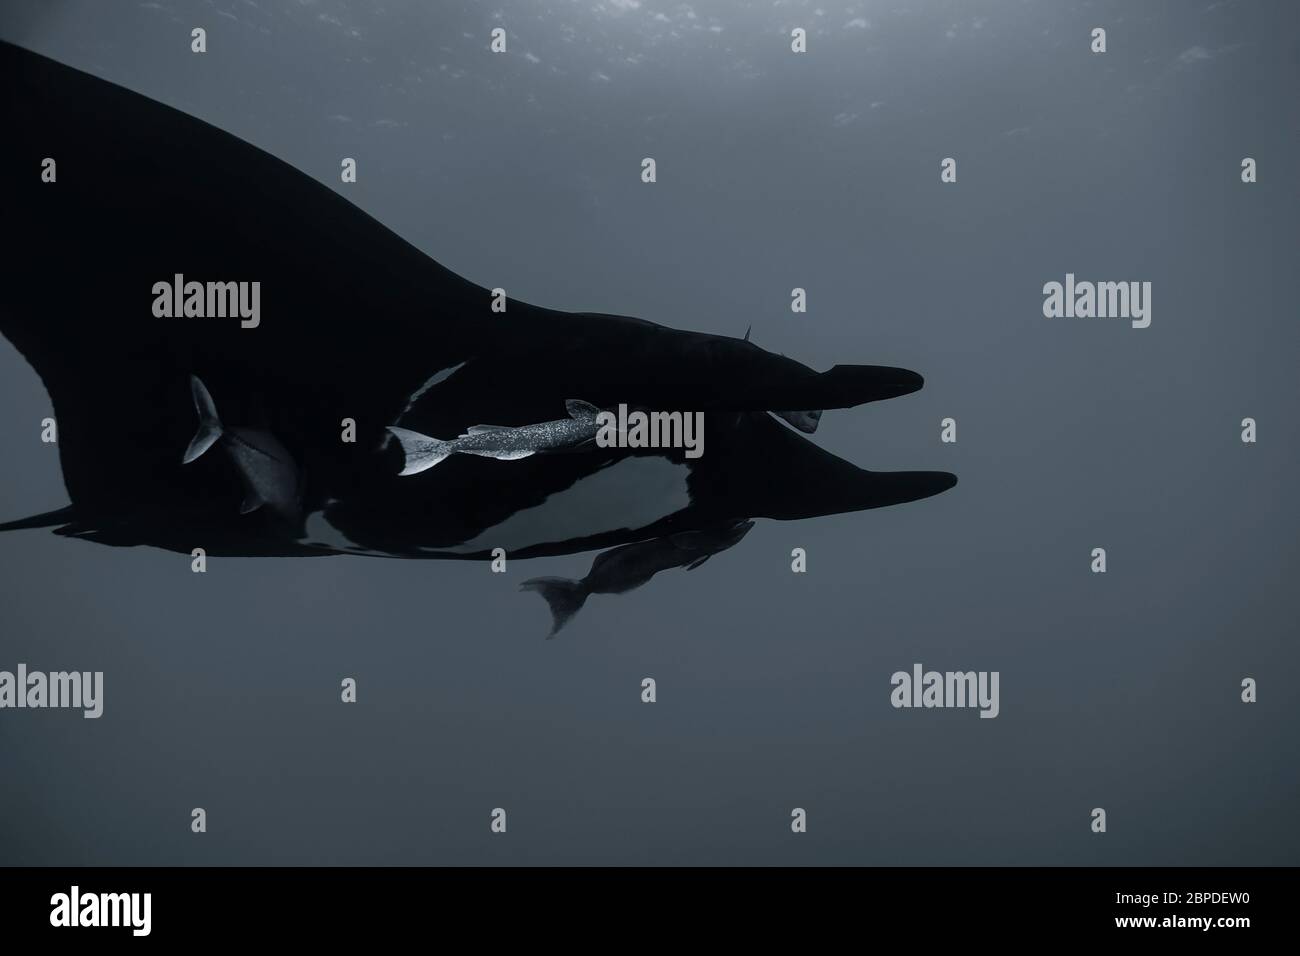 Underwater low angle view of melanistic (black) giant oceanic manta (Mobula birostris) swimming in Pacific Ocean, black and white Stock Photo